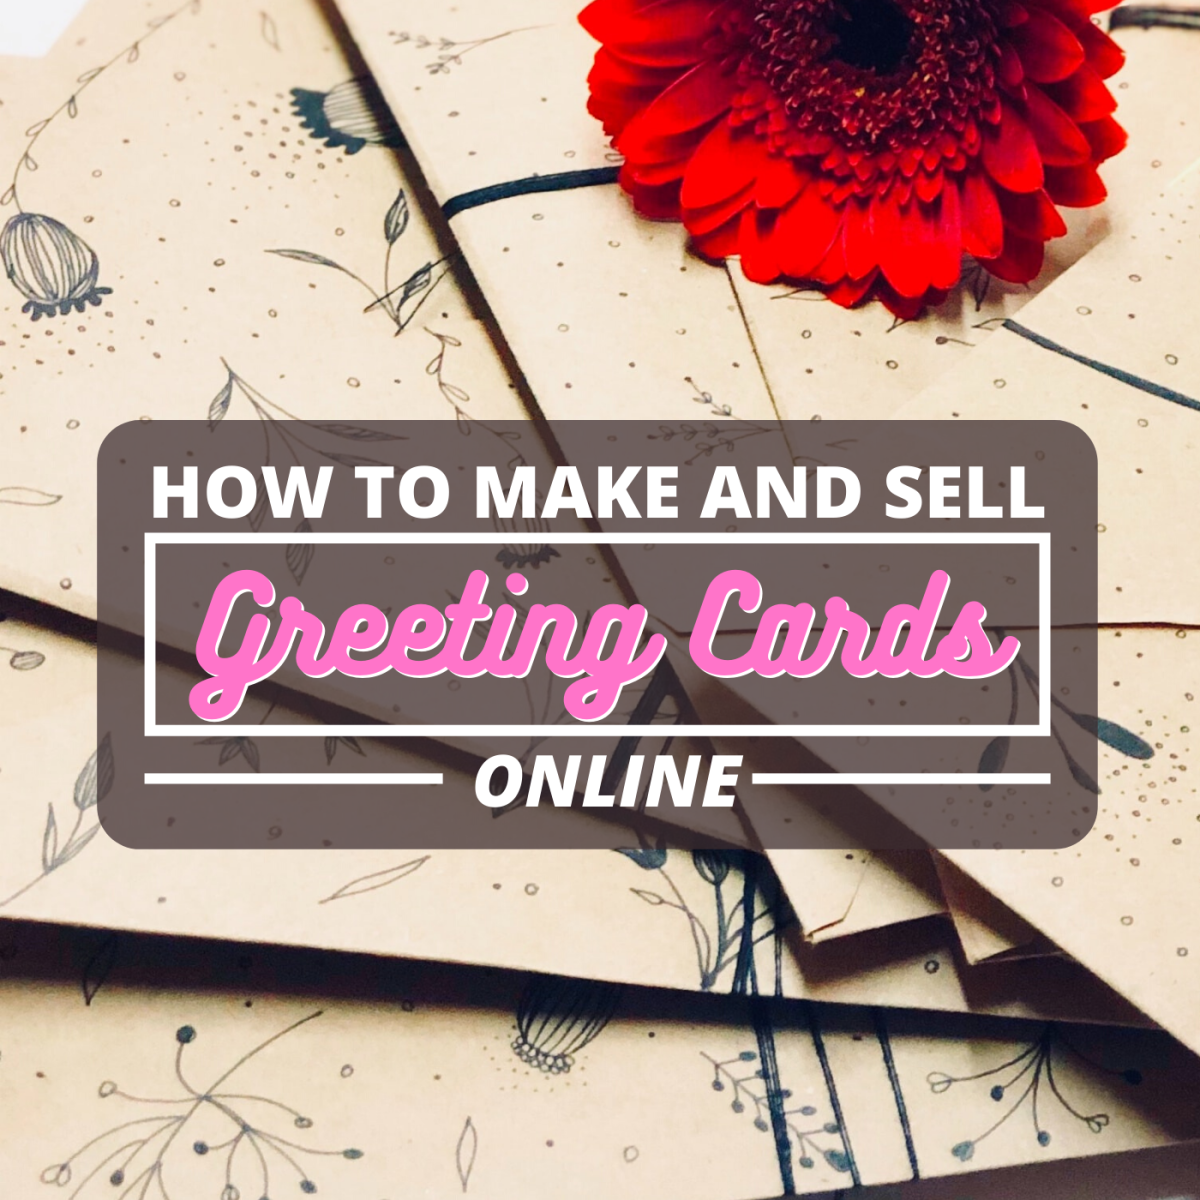 Designing greeting cards and selling them online can be a great way to make extra income. 